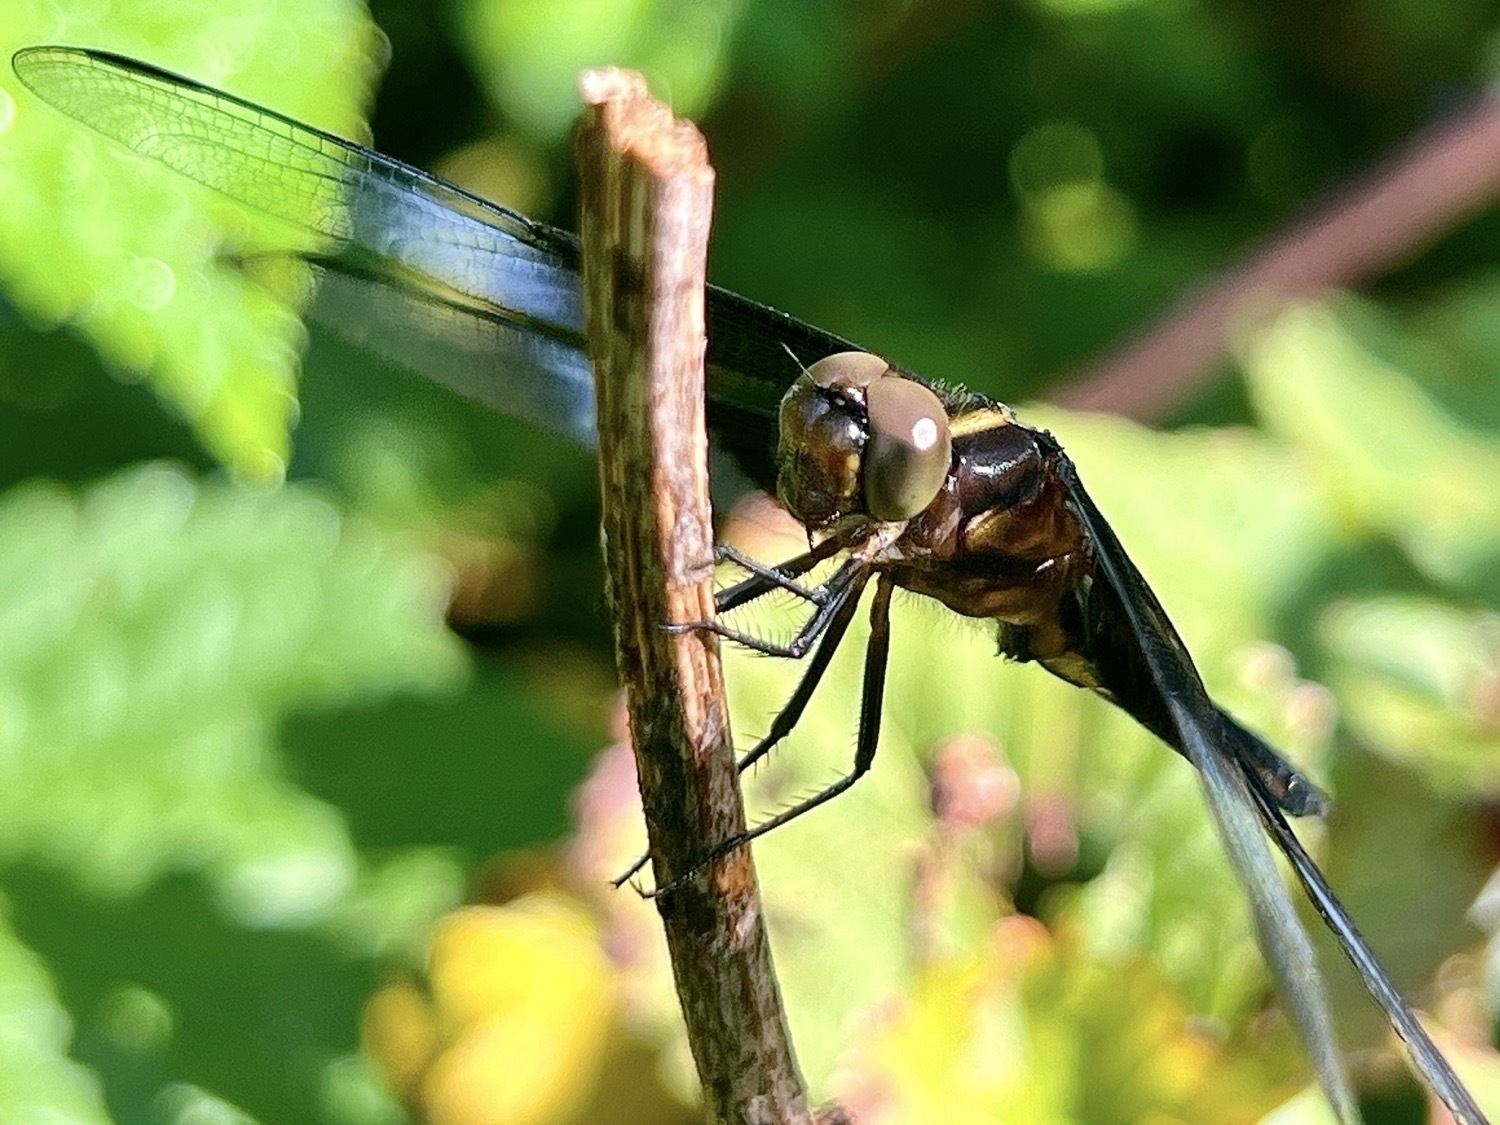 A black and yellow dragonfly perched on a plant branch and photographed from the front at an angle that nightlights the eyes and shows the side of the body. The four wings are less visible at the edge on angle of the photo.